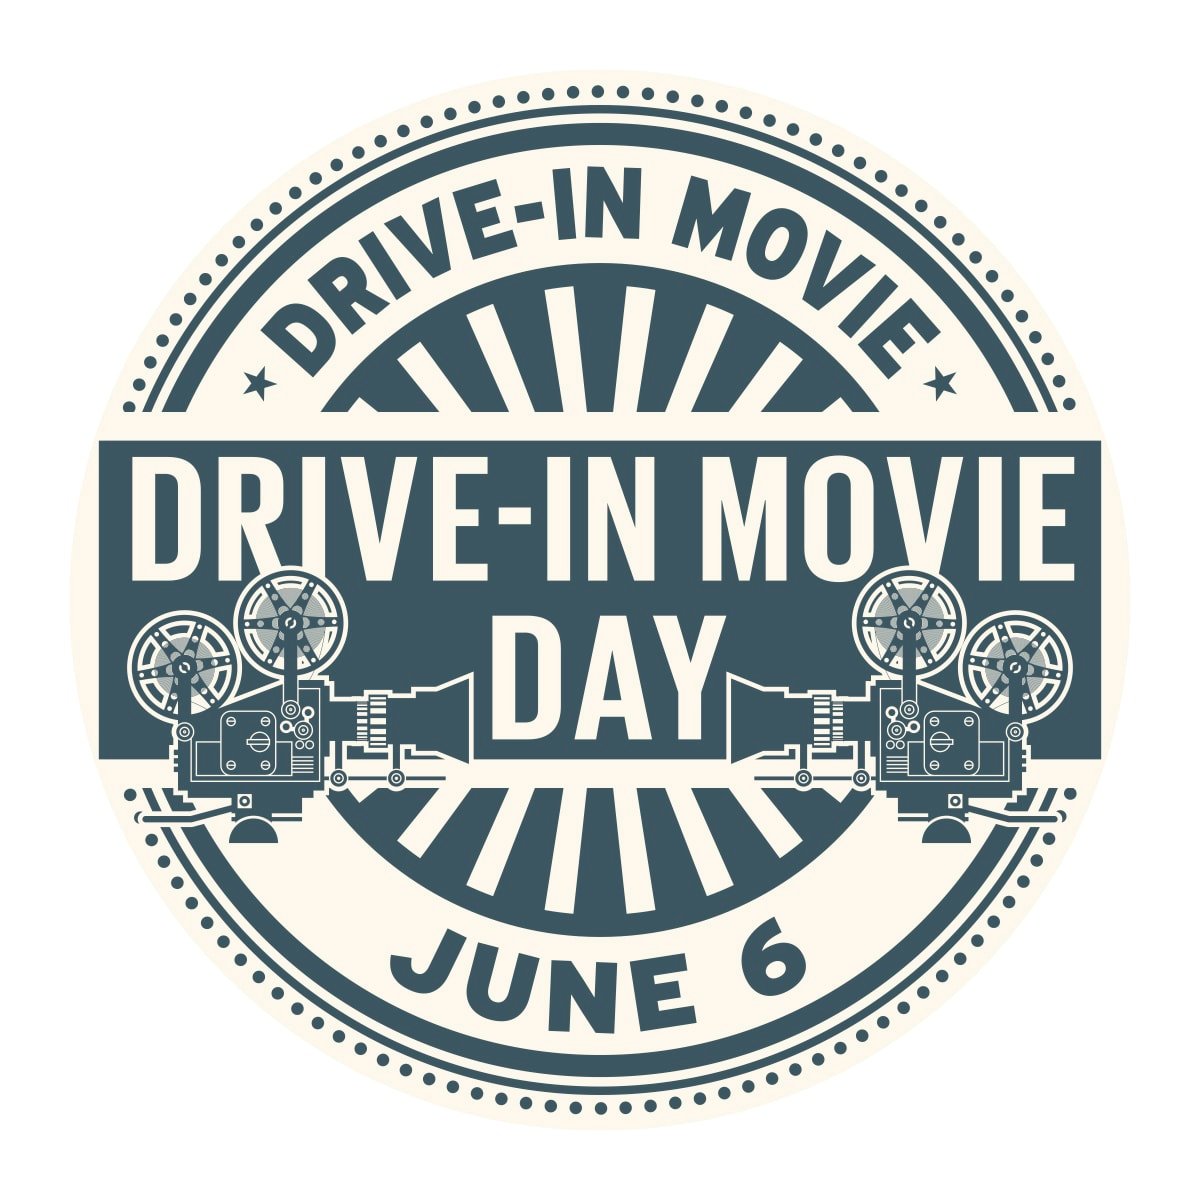 Drive in Movie Day June 6th